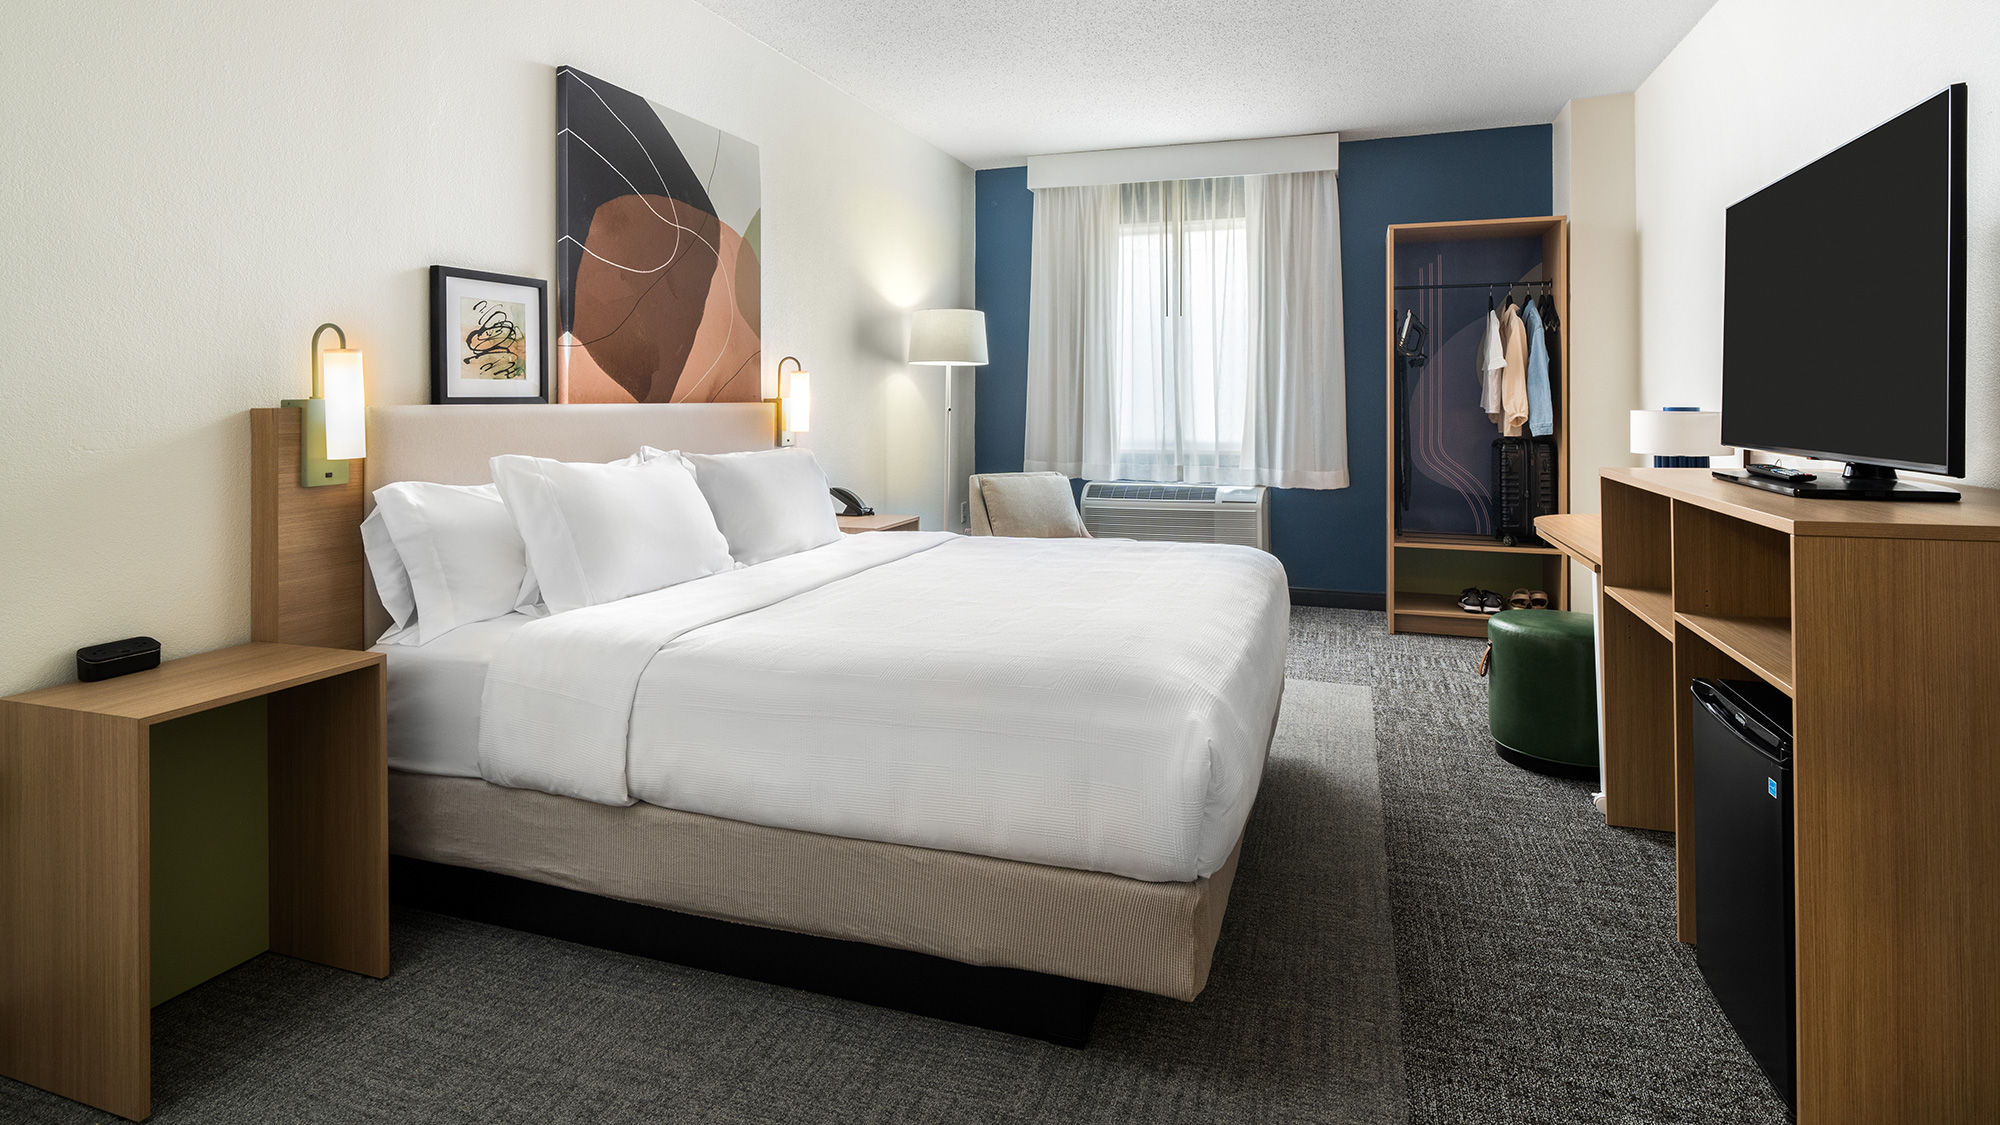 A look at what a Spark guestroom will look like.